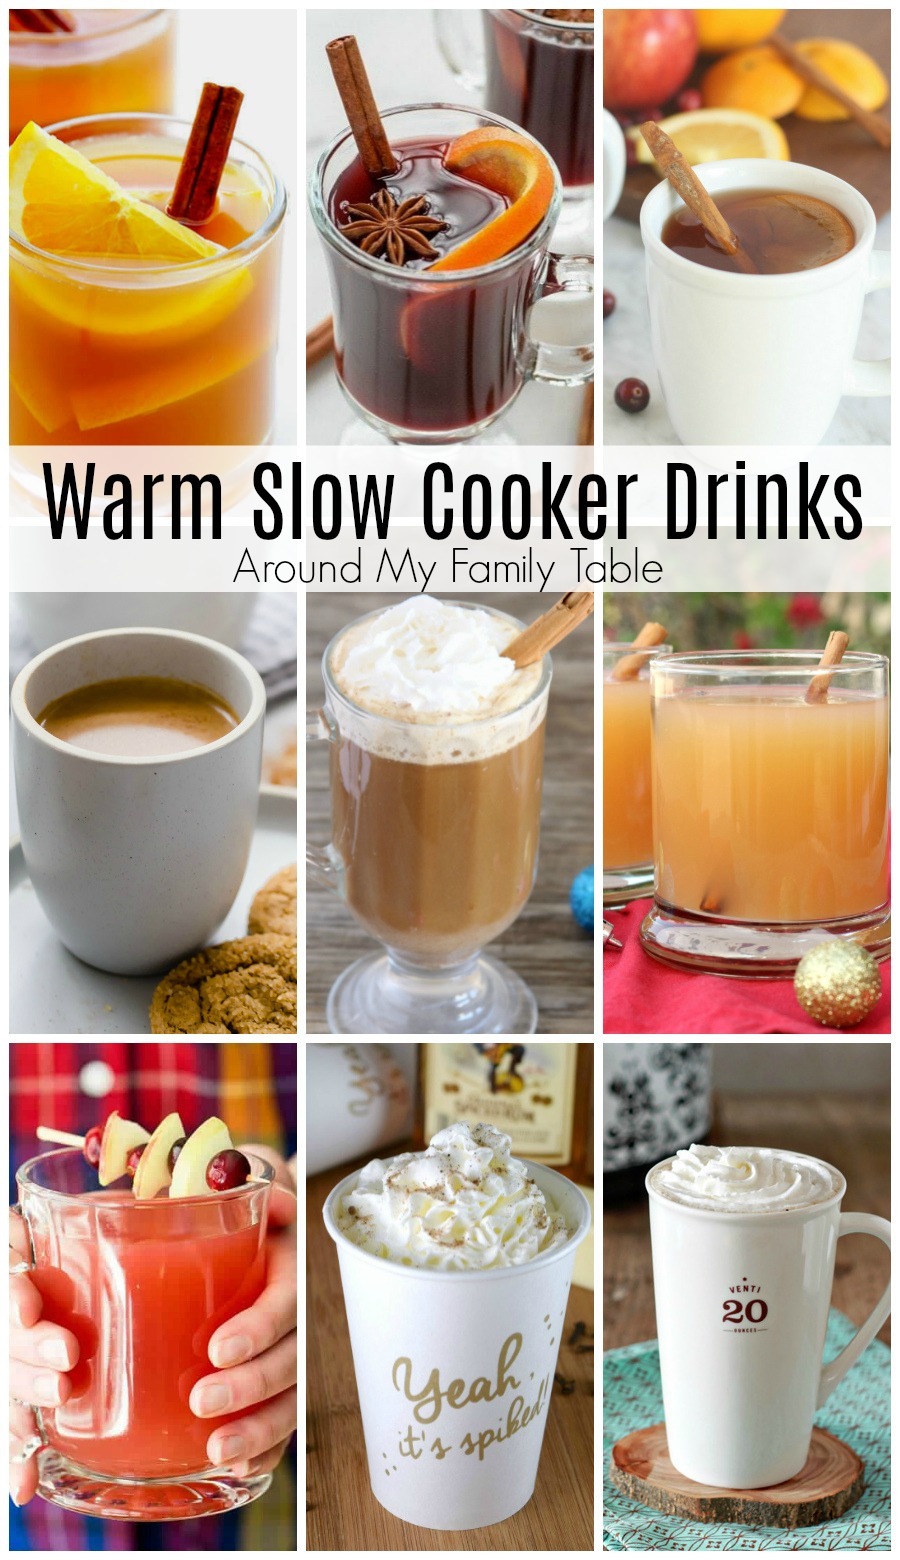 Warm Slow Cooker Drinks - Around My Family Table